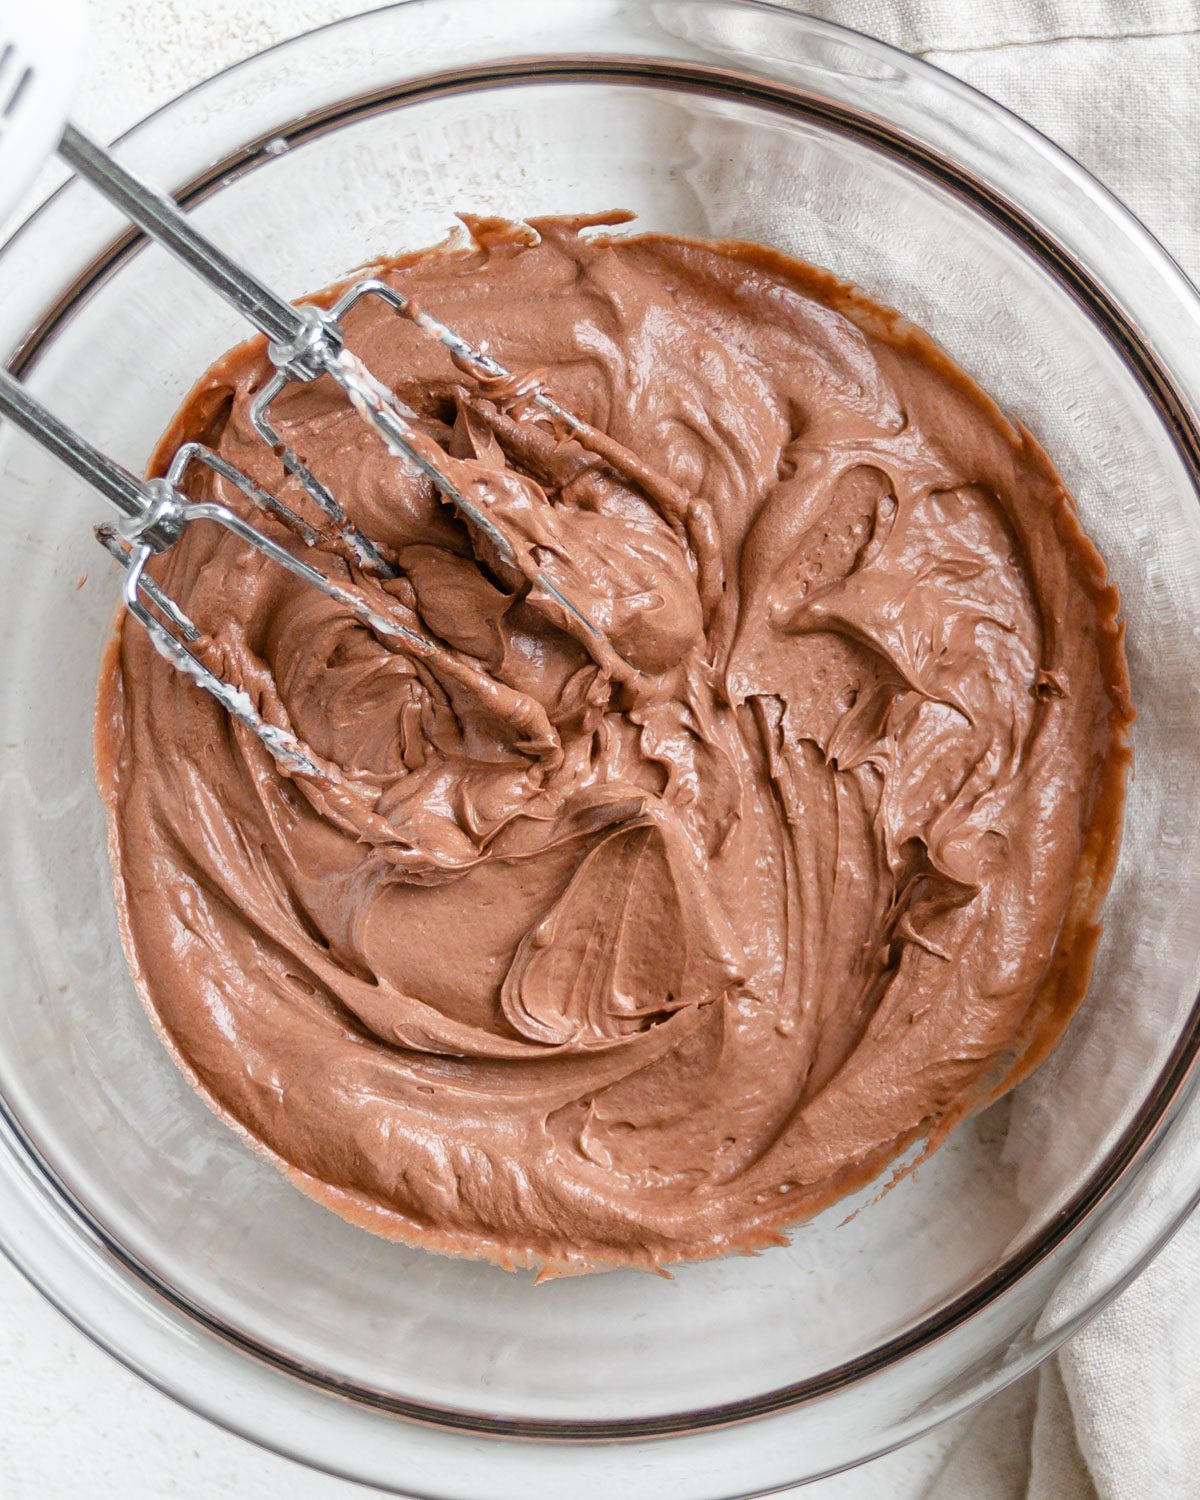 completed Vegan Chocolate Frosting in a bowl against a white background with a mixer on top